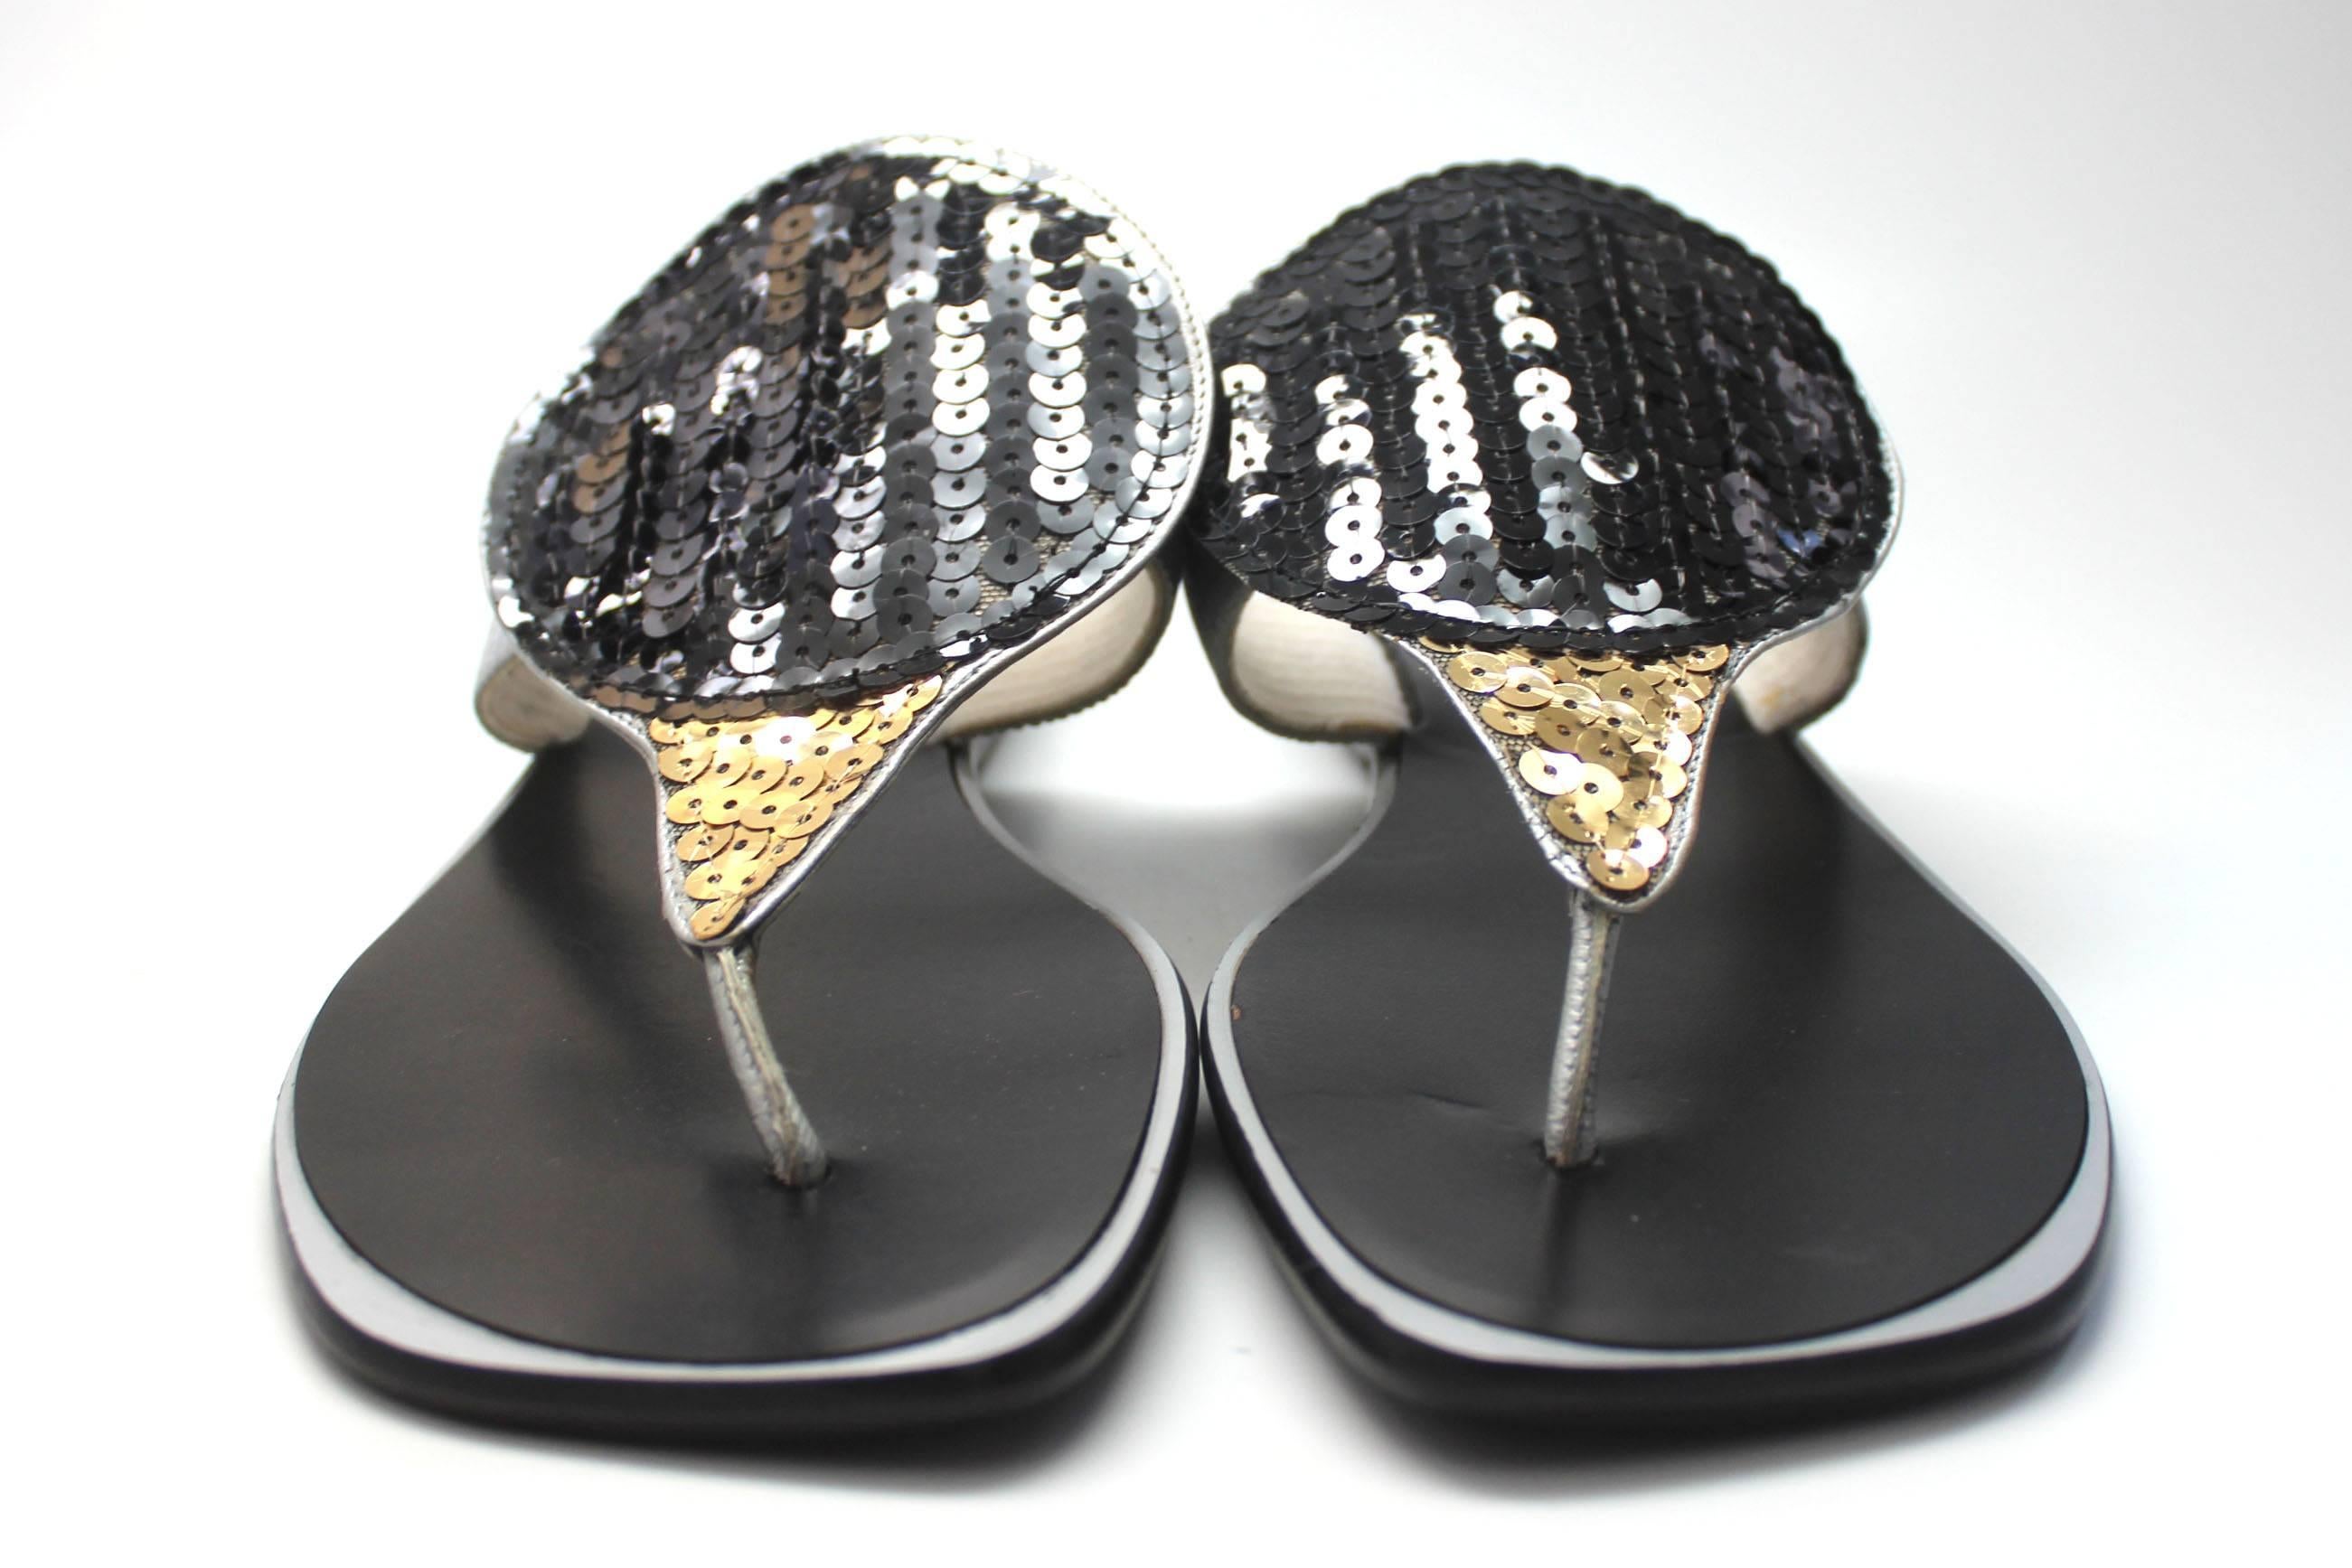 These futuristic style sandles have a large round disc covered in black sequins that extends into gold sequins towards the toes. They are in never worn condition and come with their original box. 